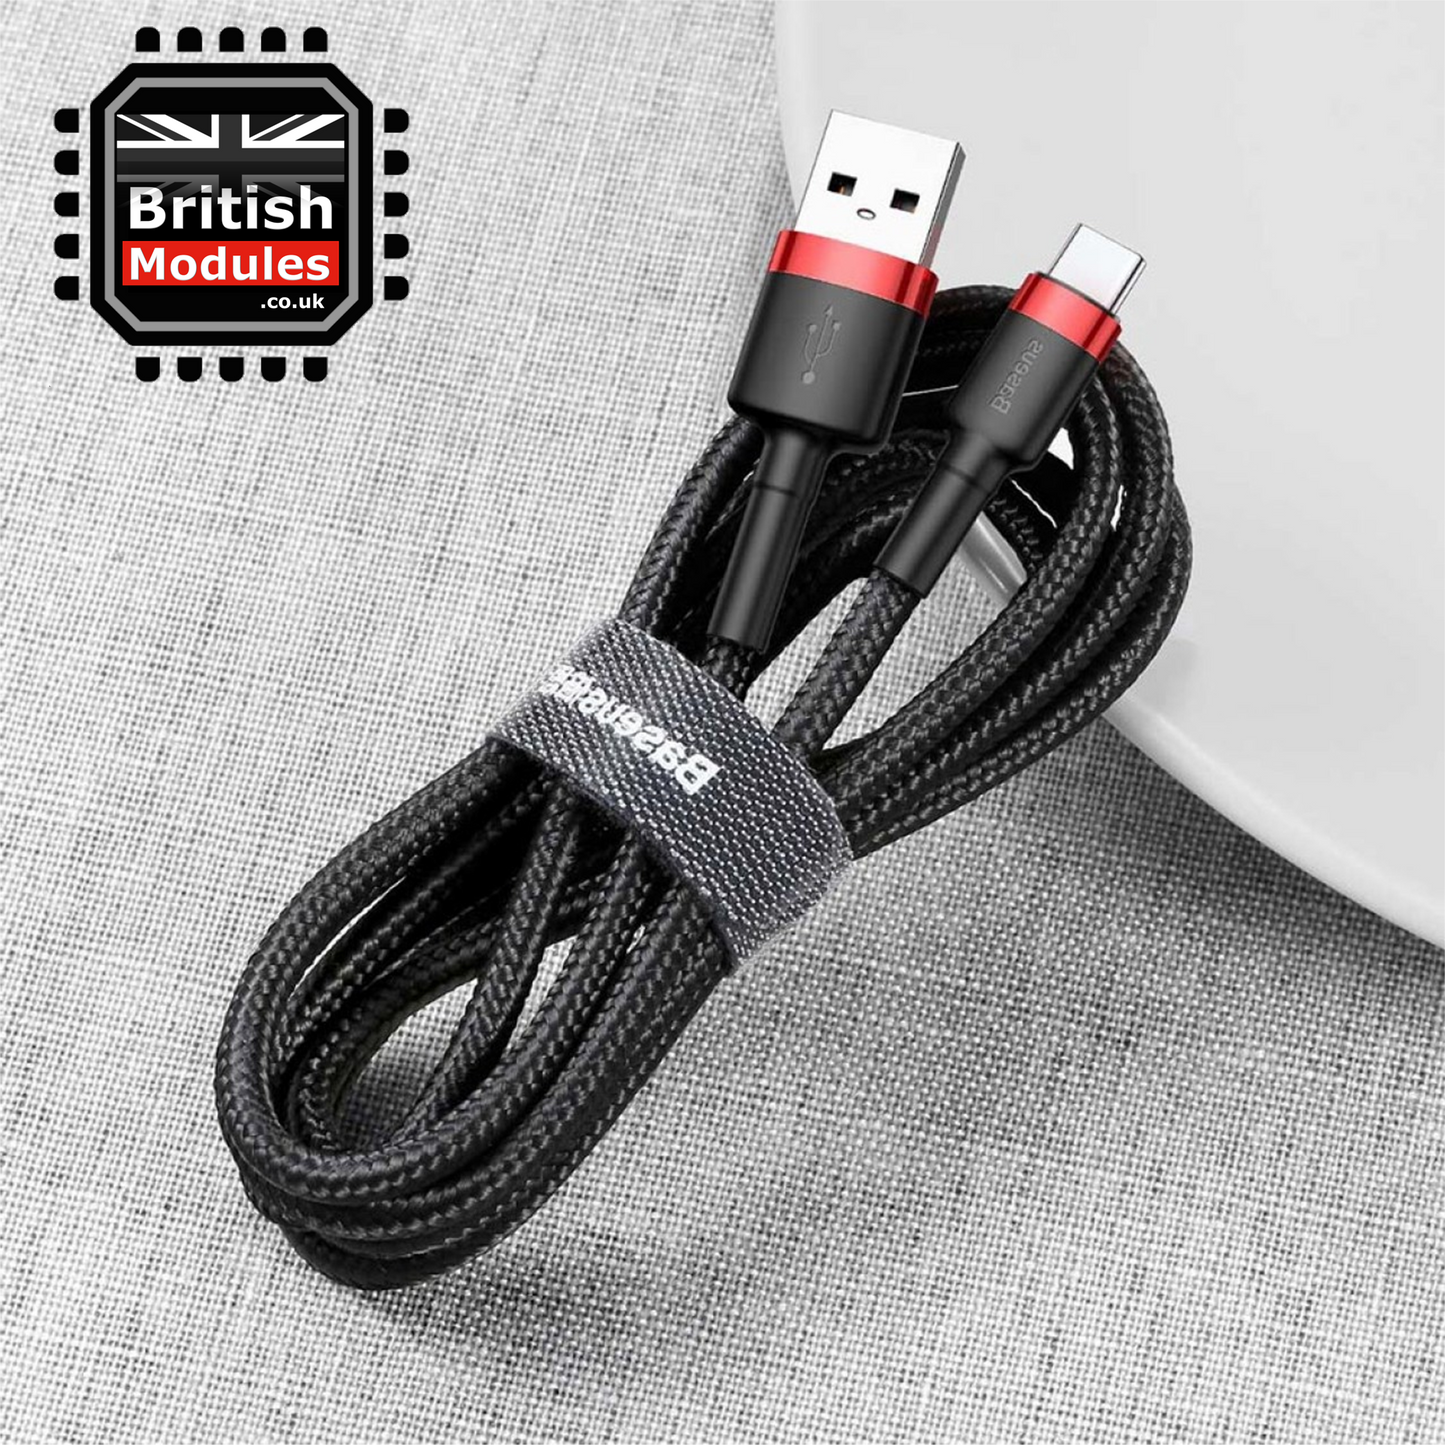 2M Baseus Braided USB Type C QC3.0 Fast Charging Cable 3A Quick Charger Black